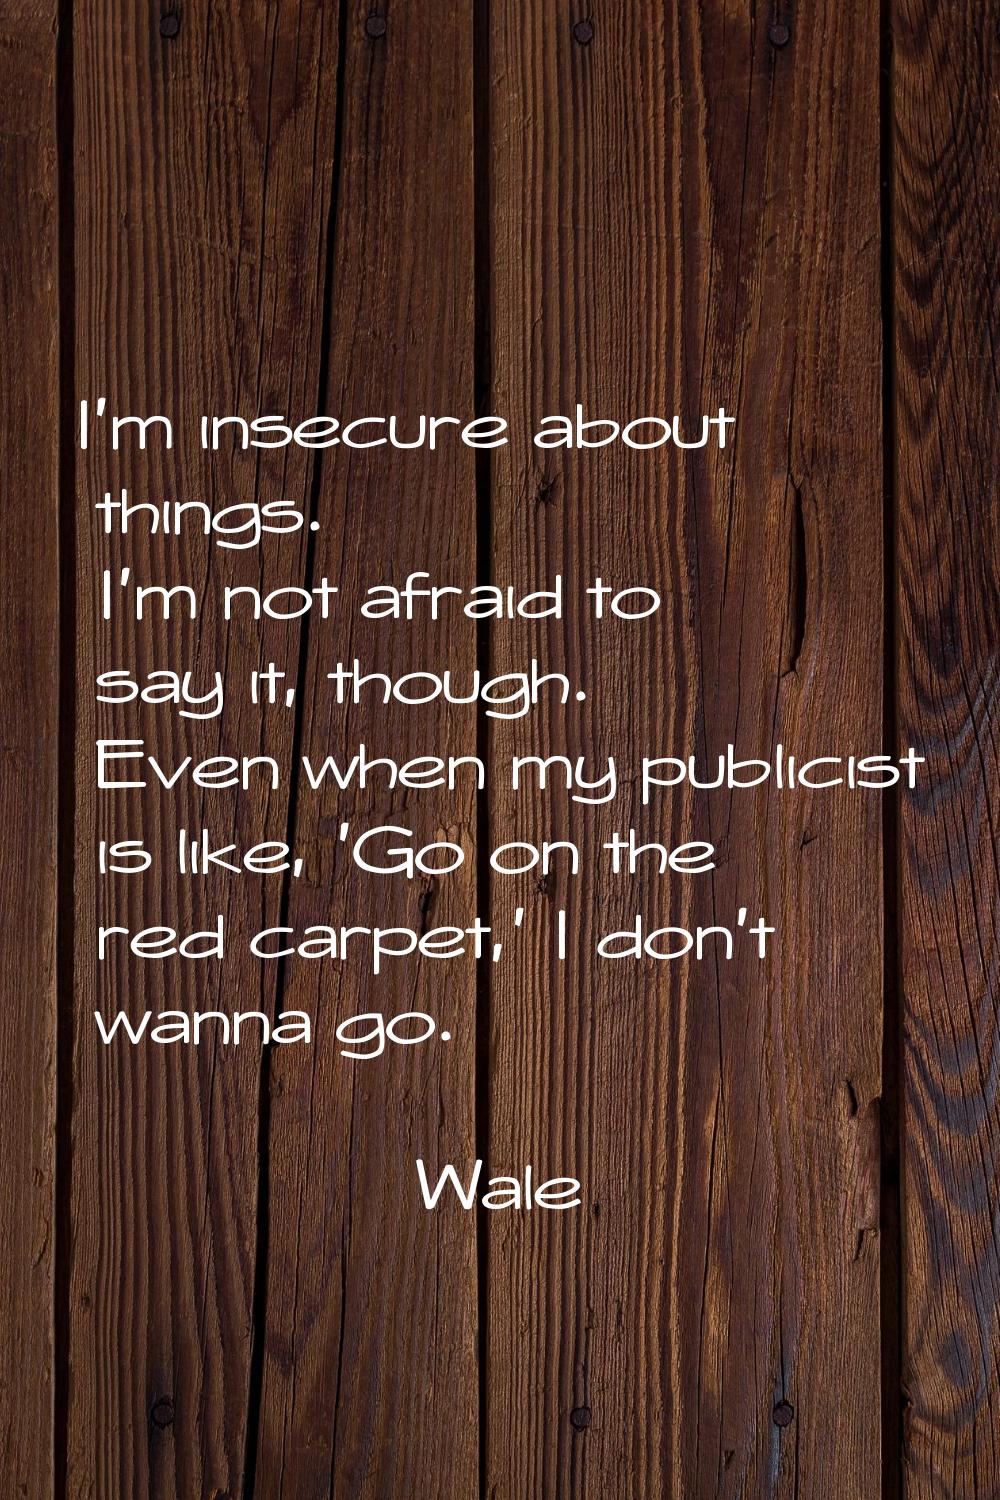 I'm insecure about things. I'm not afraid to say it, though. Even when my publicist is like, 'Go on